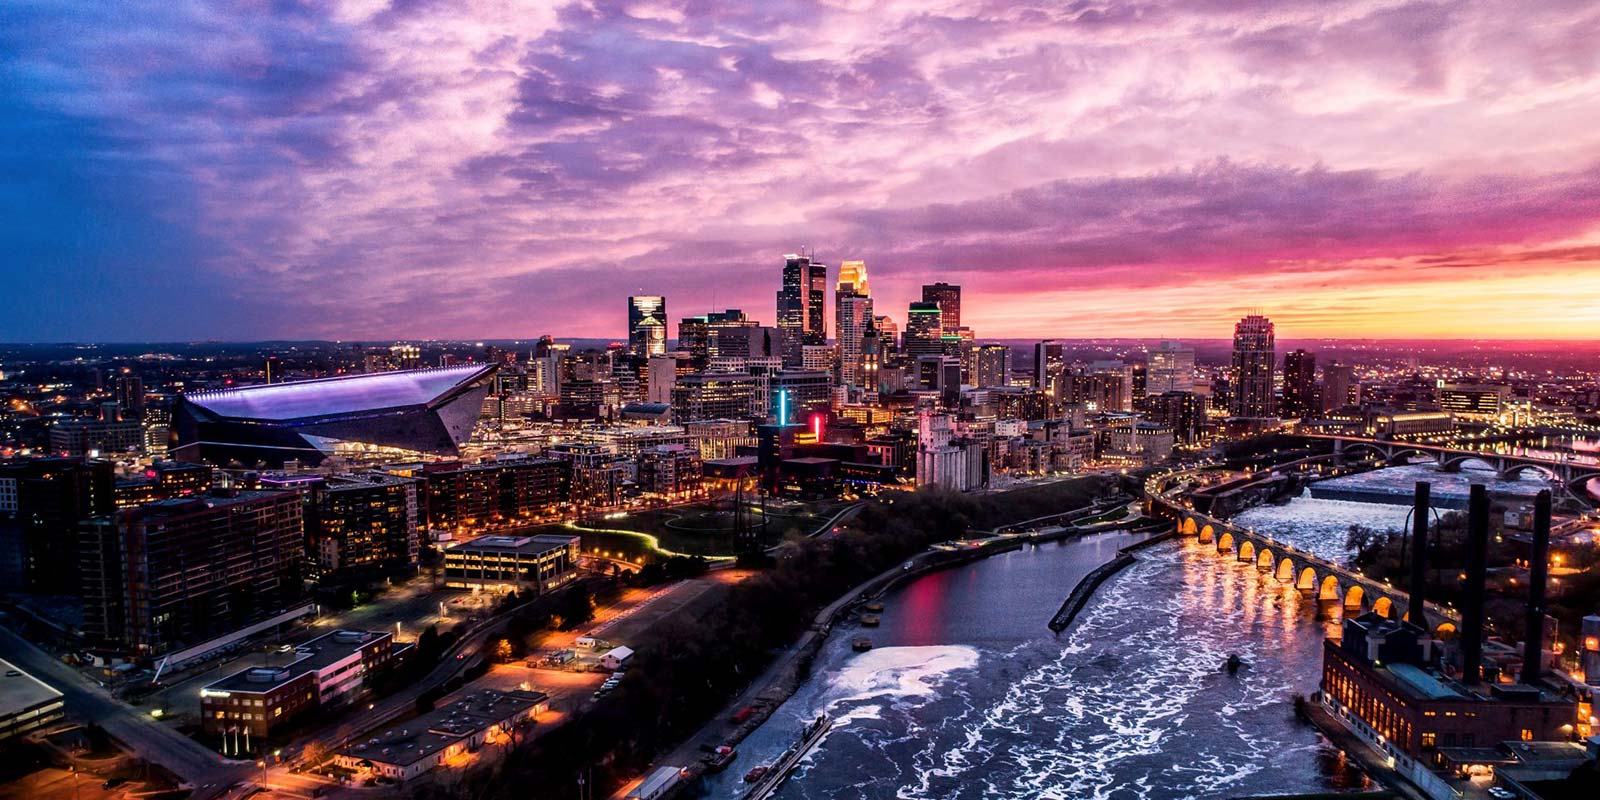 Minneapolis skyline with colorful sunset